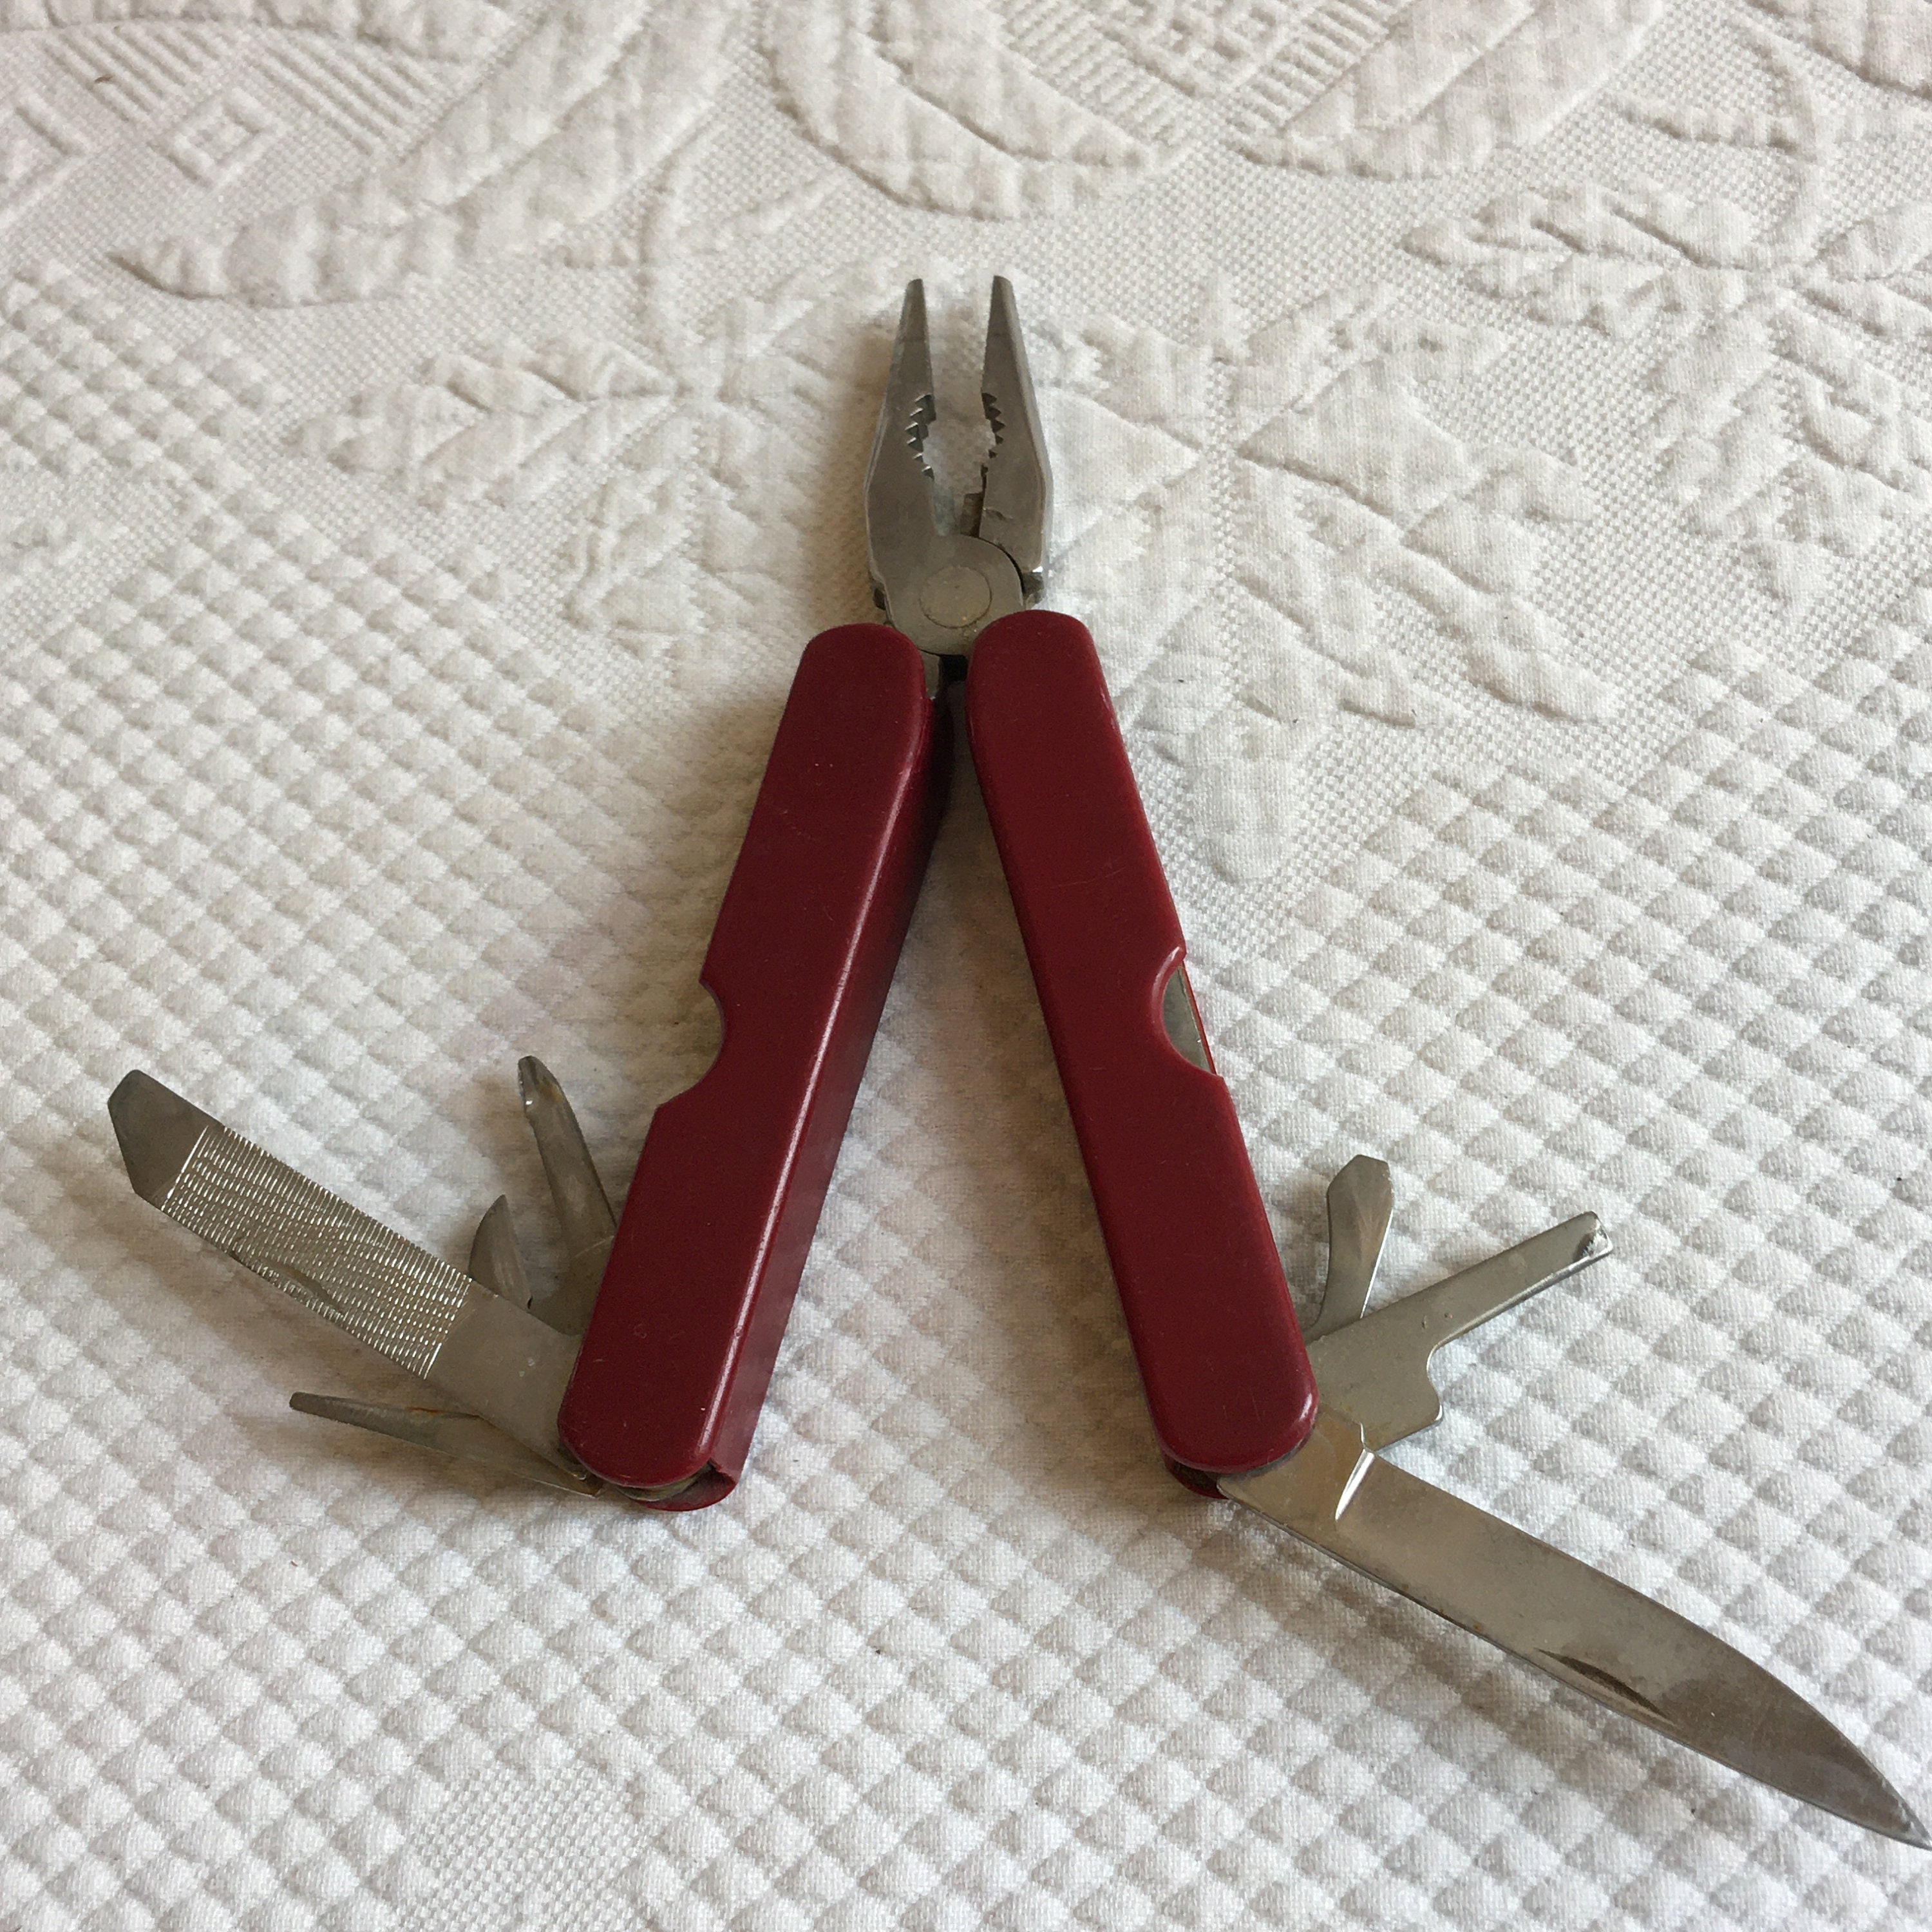 Chain Cutter Plier, Wire Cutting Pliers, DIY Jewelry Making Tool EASY to  Open Chain Links